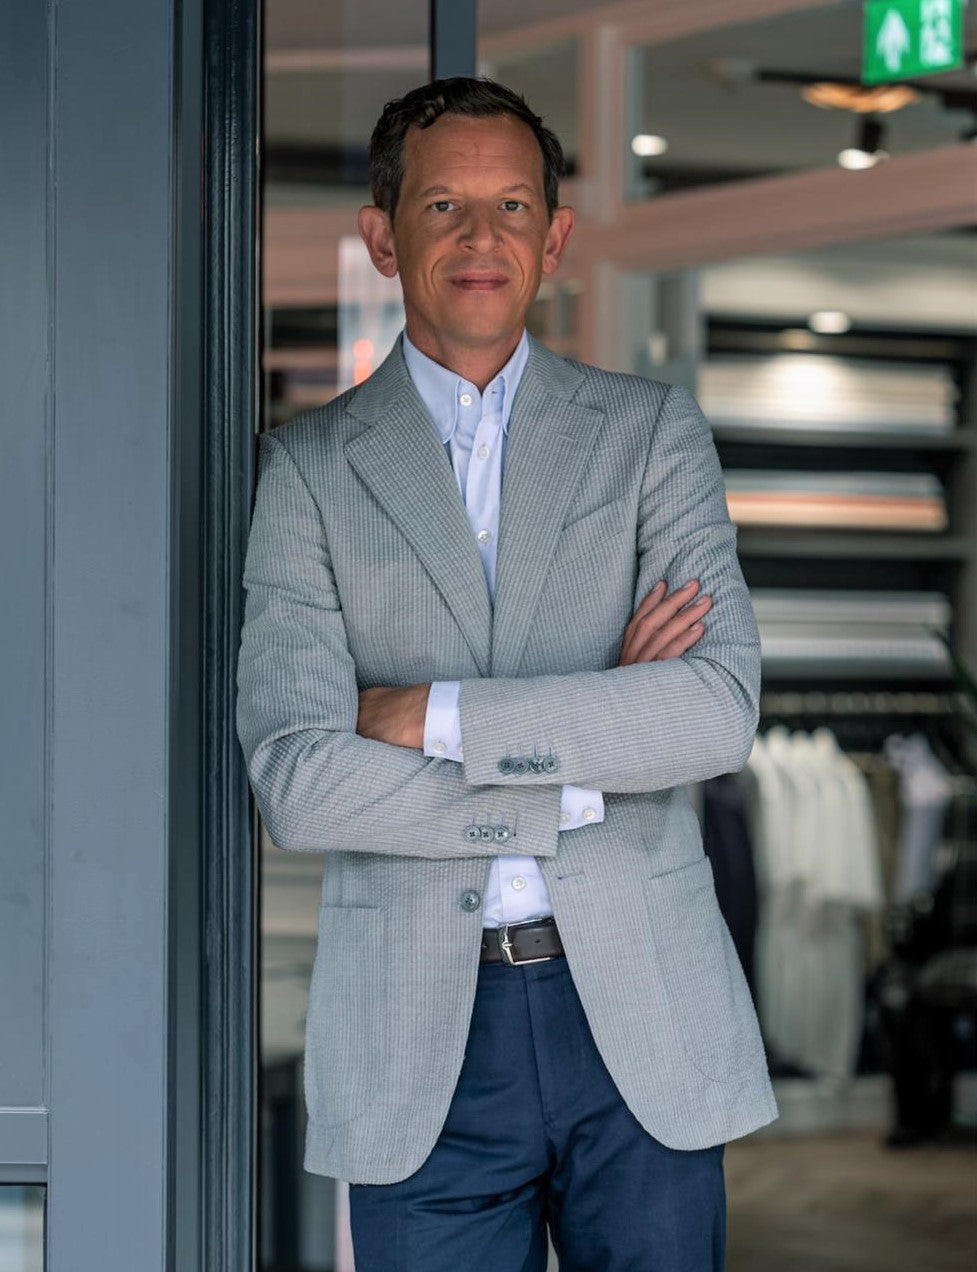 Dooley & Rostron upholds the heritage Frank Rostron Bespoke Shirtmaker was so loved for - in a rich history of luxury tailoring, creating the finest bespoke shirts and handcrafted suits for many noted faces such as celebrities, sports stars and politicians